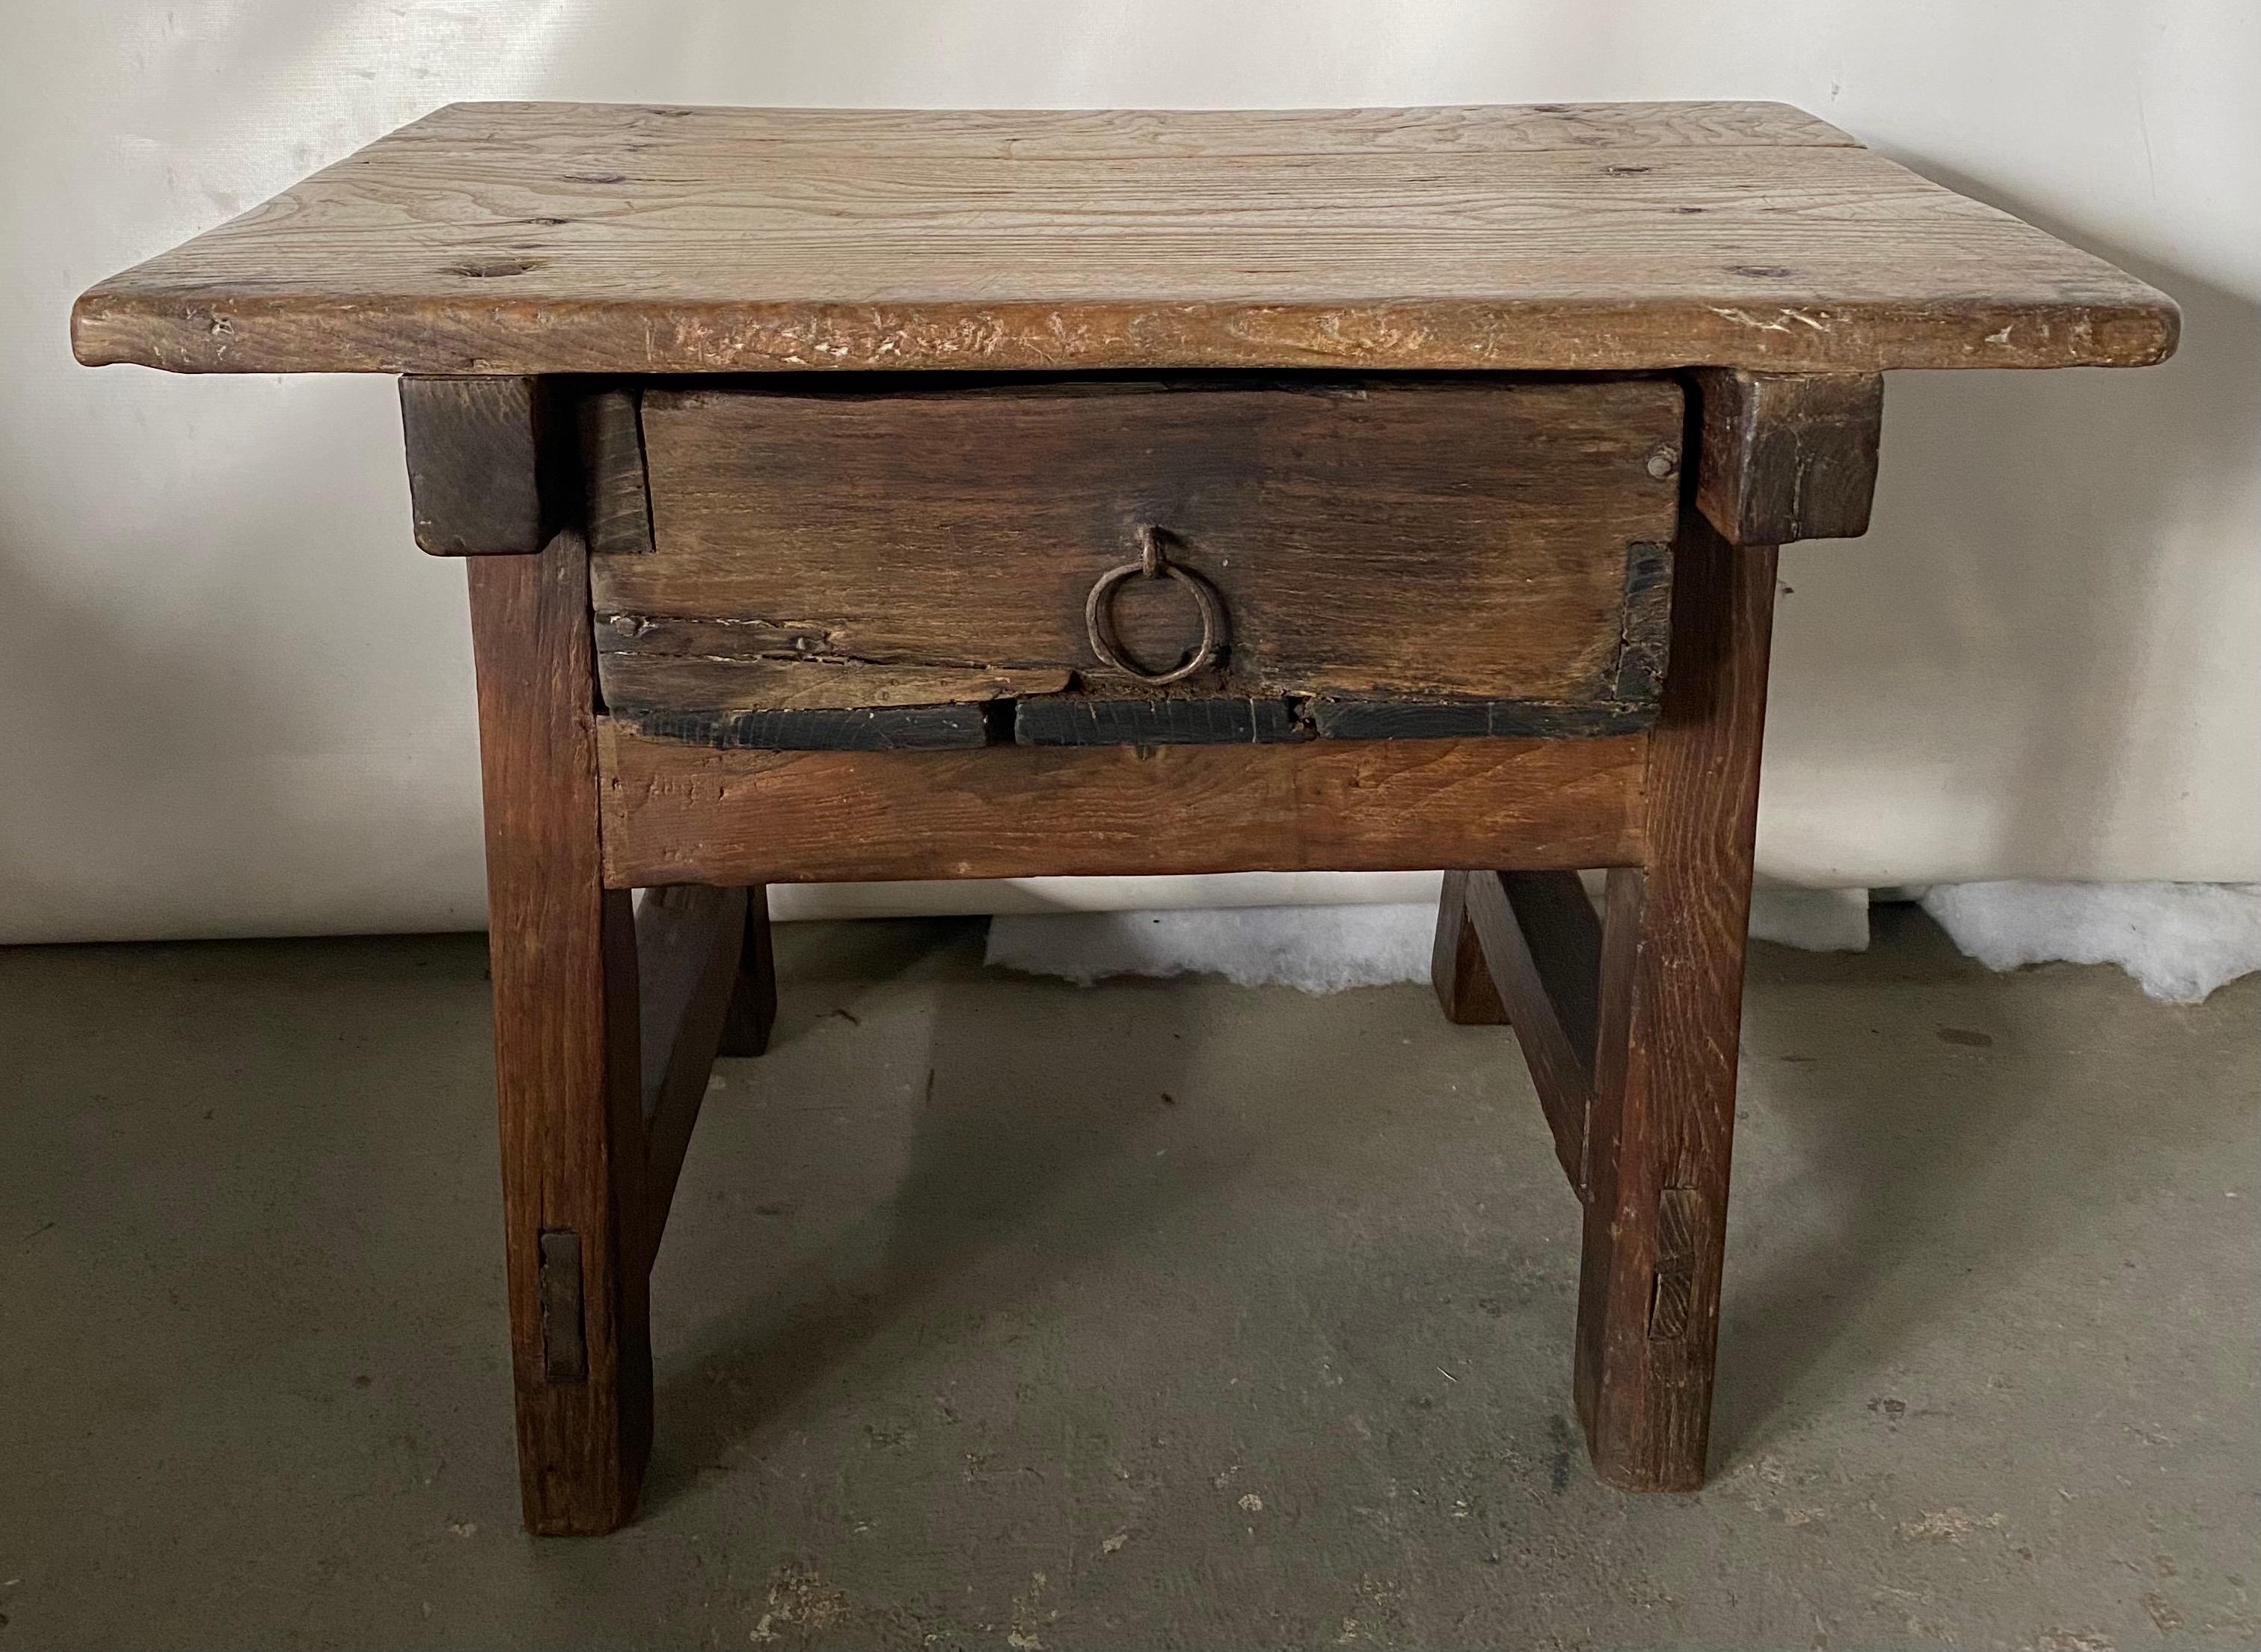 19th century low rustic country single drawer side or work table. Table has wonderful aged patina. It can be used as an end table or coffee table in a rustic decoration but also it could be the used as an accent combined with midcentury pieces in a